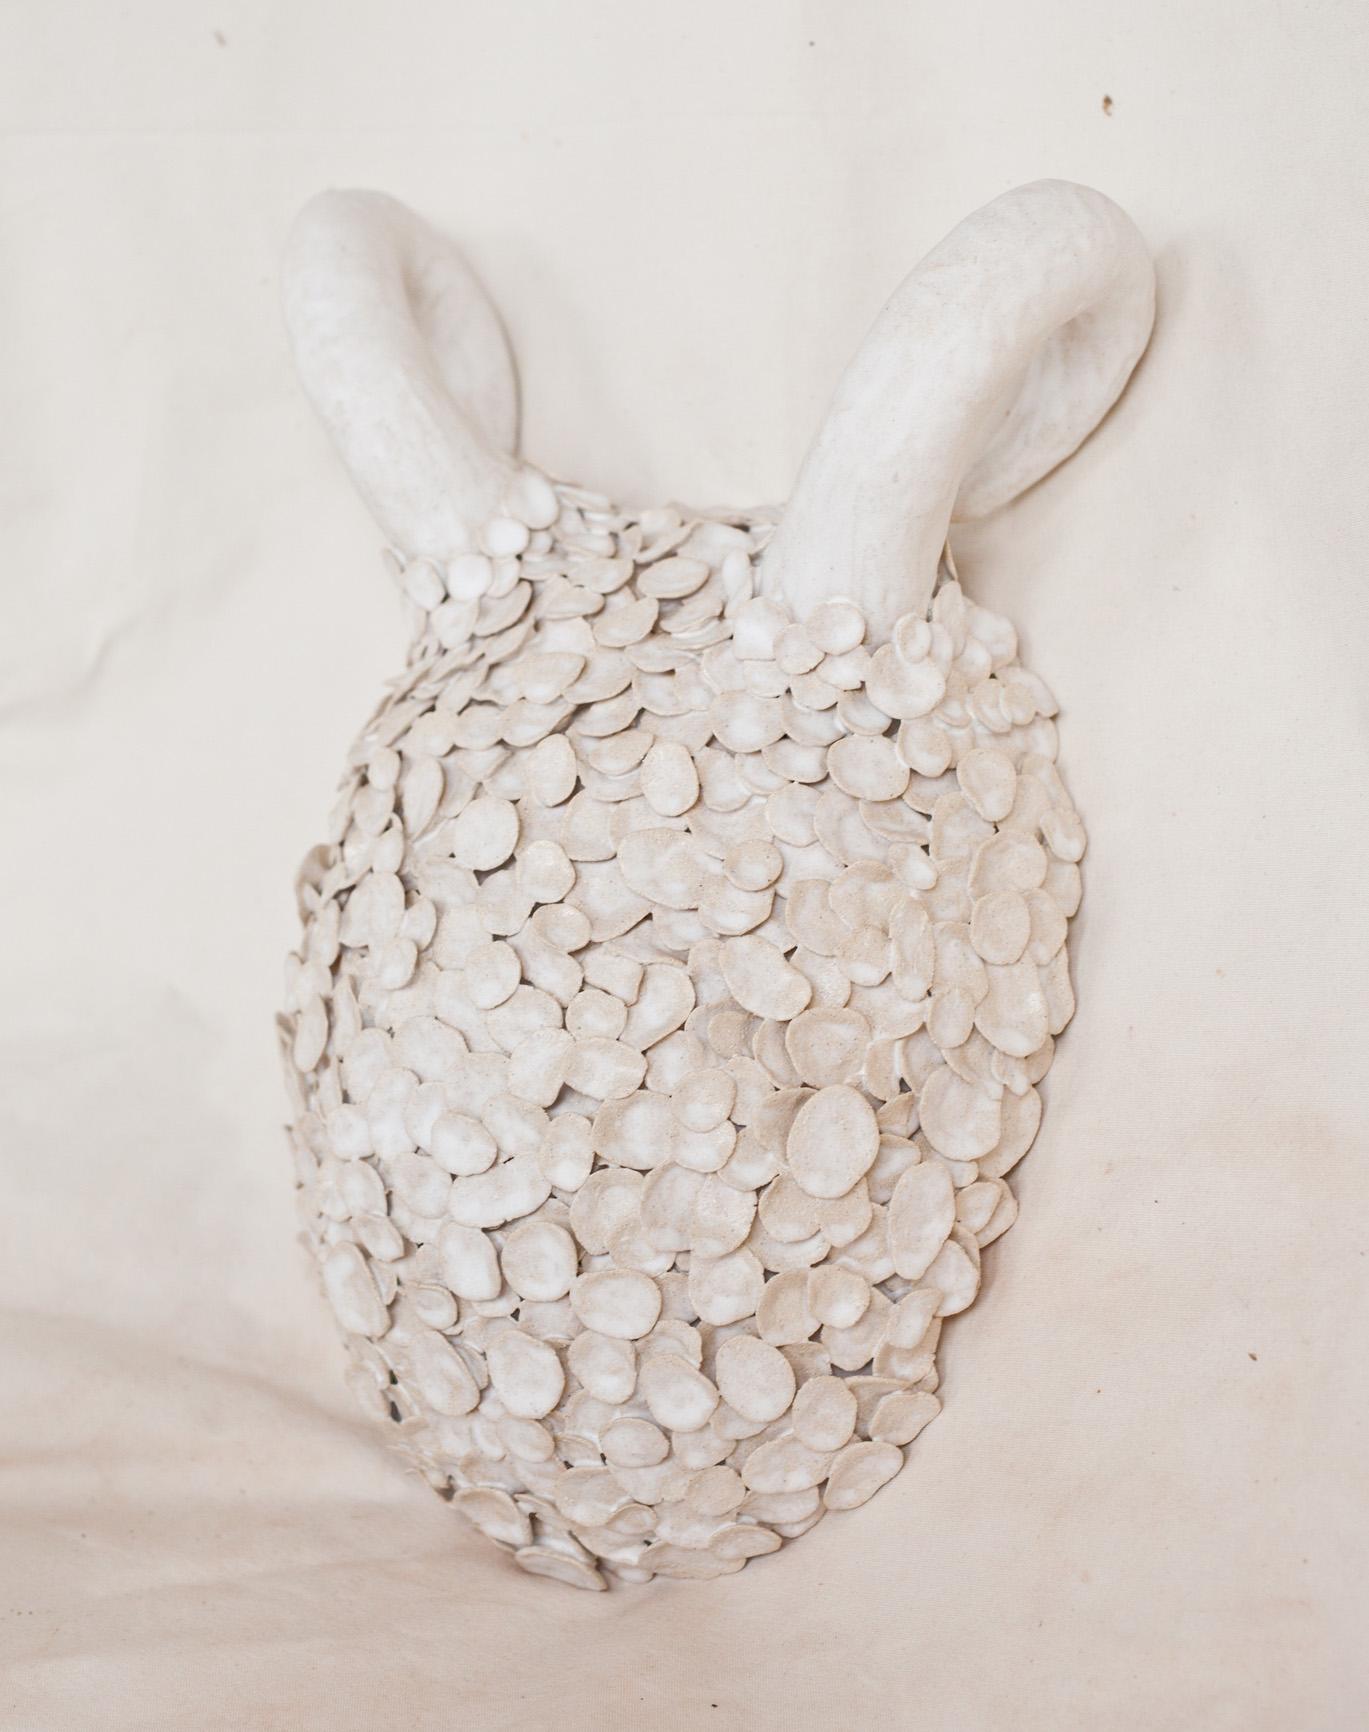 Noe Kuremoto is a ceramic artist who makes everything by hand using simple tools. She’s known for playful sculptural work that takes the form of functional wares. Her pieces mix child-like simplicity with contemporary sophistication, and incorporate